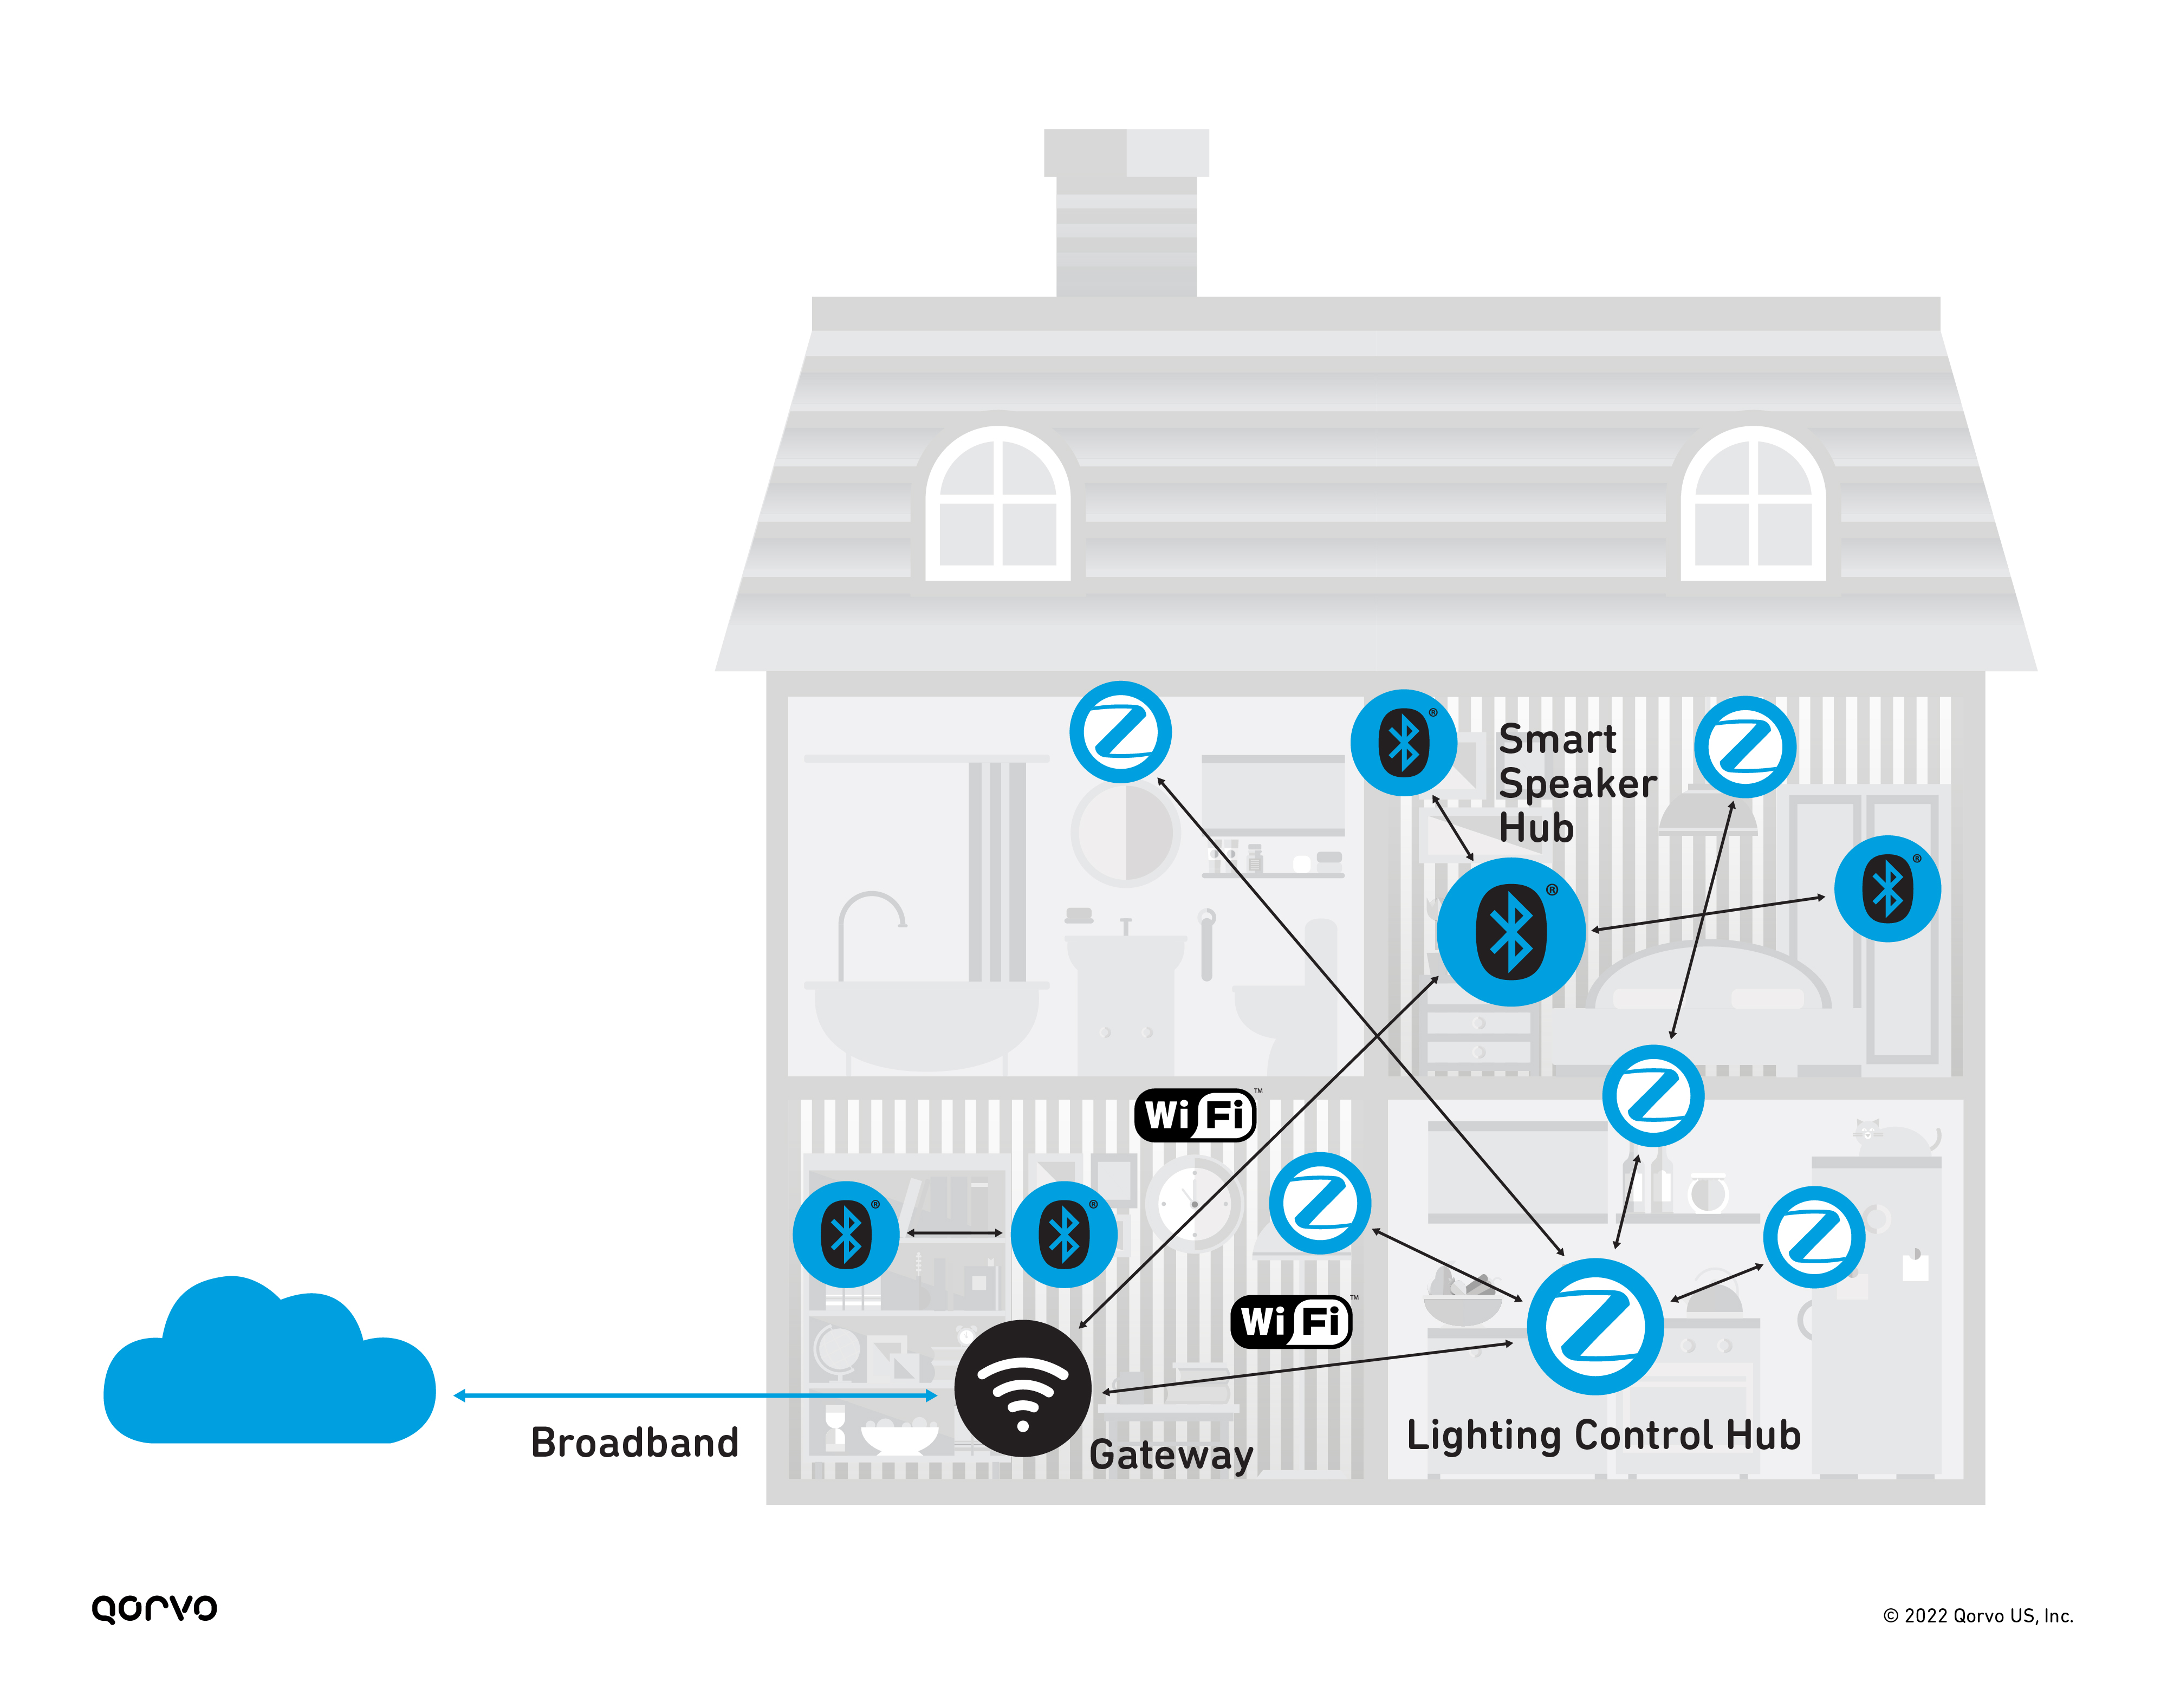 A fragmented smarthome with separate ZigBee and Bluetooth network hub